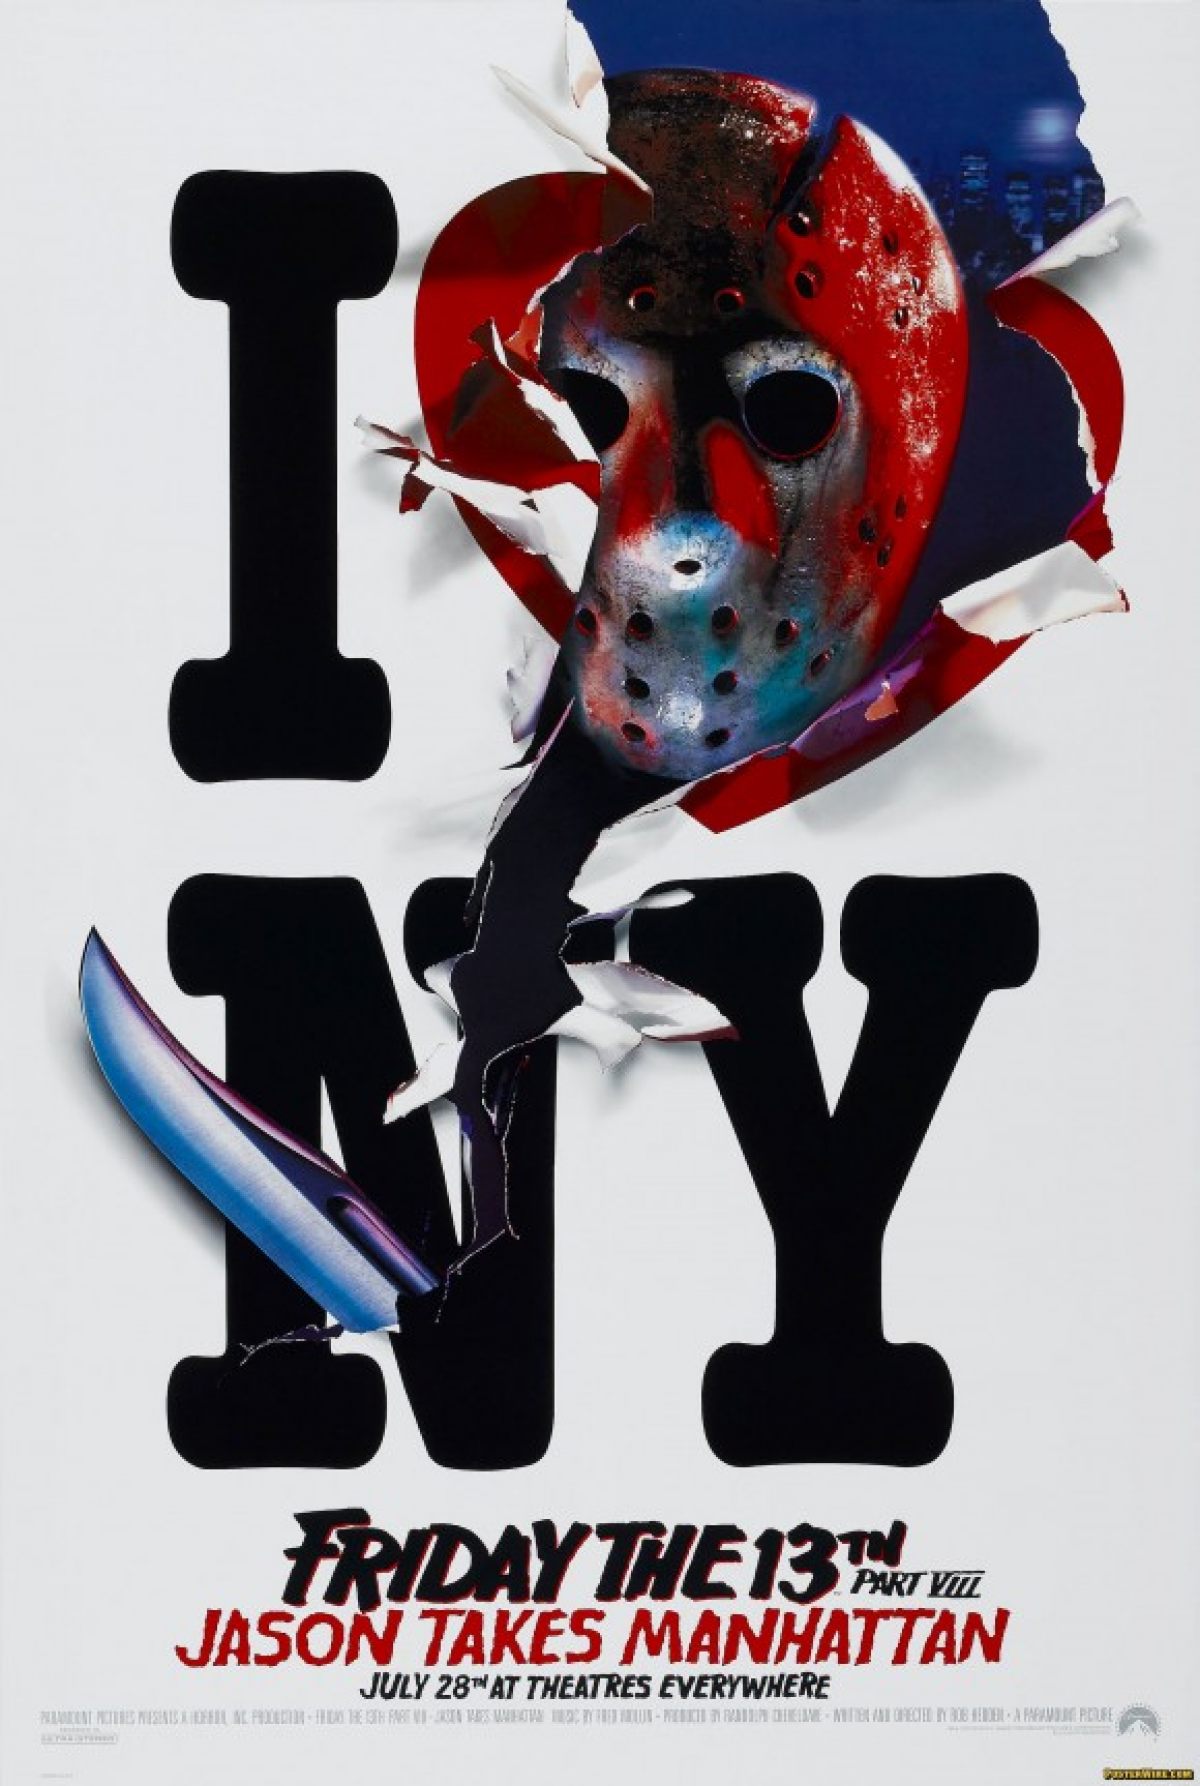 Aggregate 70 friday the 13th iphone wallpaper  incdgdbentre